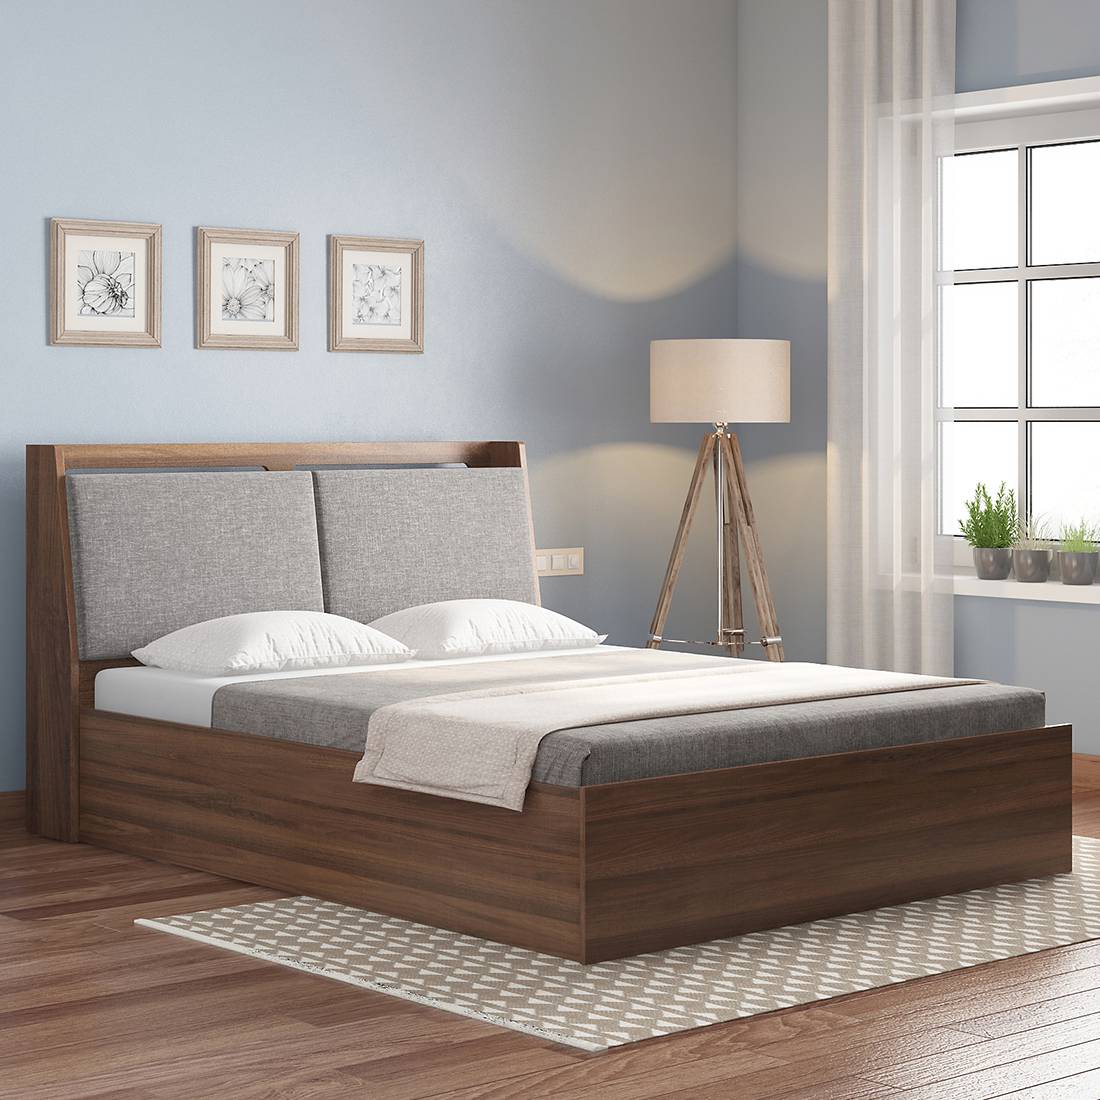 Buy Bed Online 25 Off On Wooden Beds Starts From Rs 7